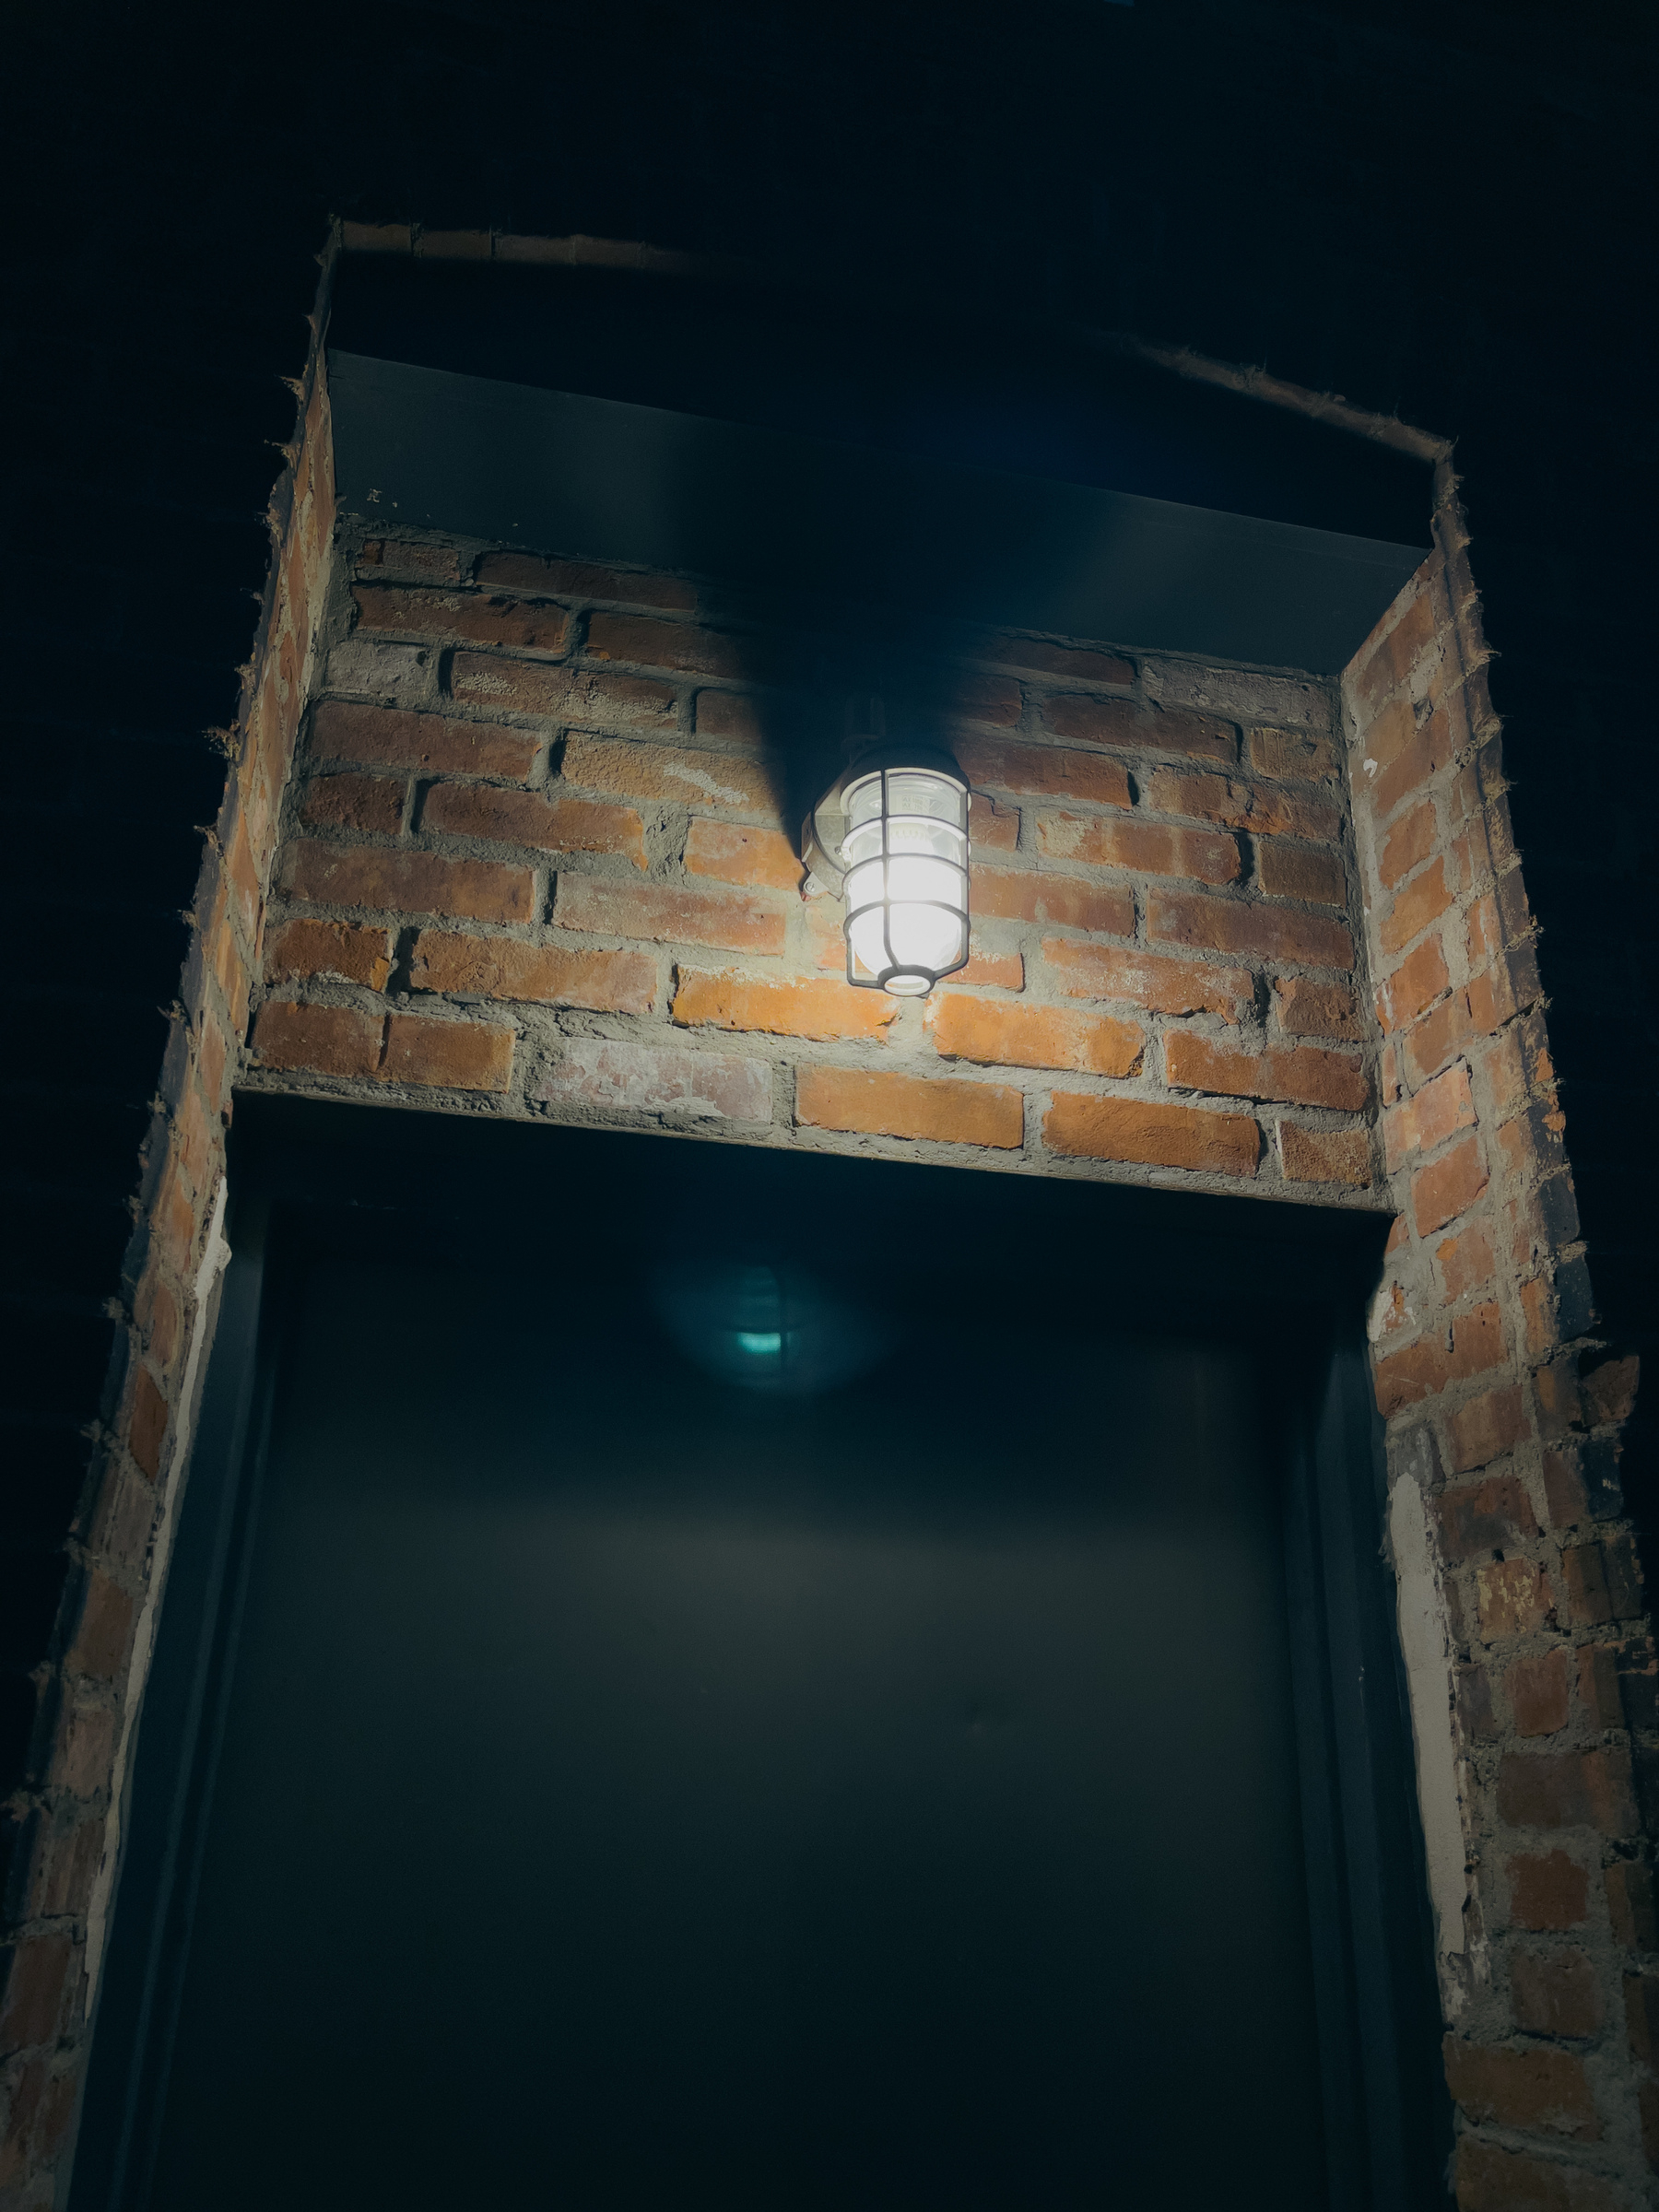 Door and light recessed into brick wall at night.